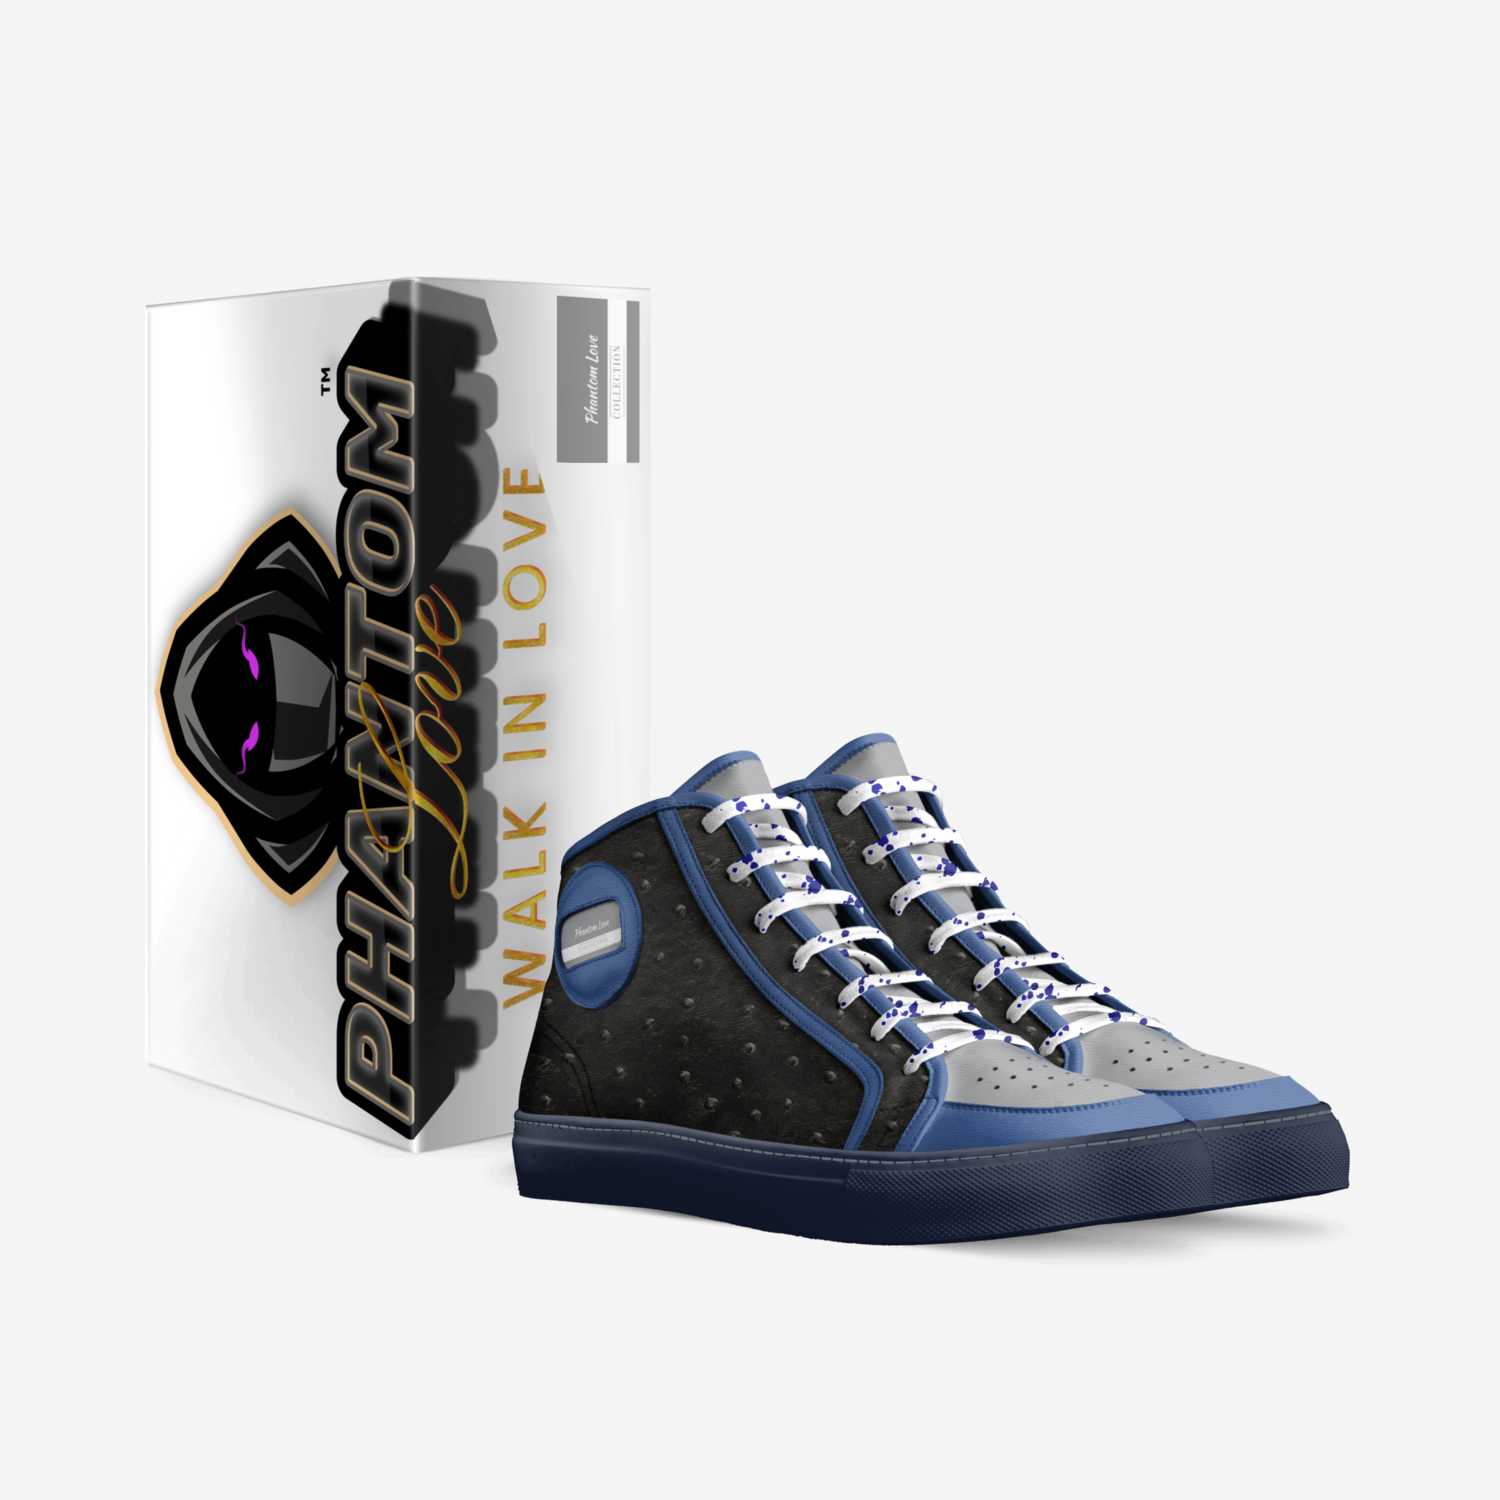 Phantom Love custom made in Italy shoes by Ronnie Fuller | Box view